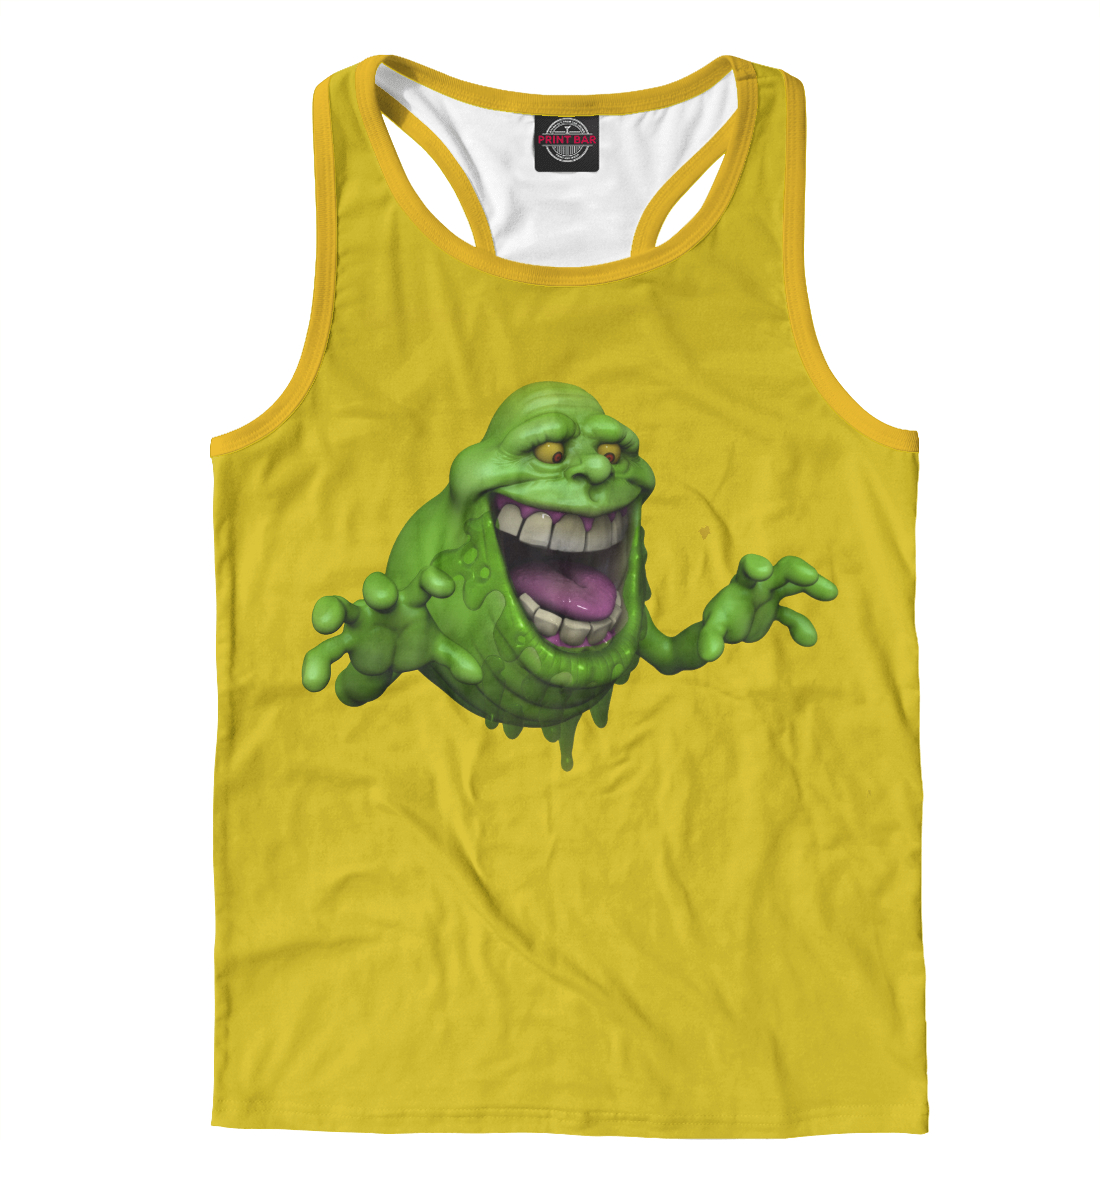 

Slimer from Ghostbusters